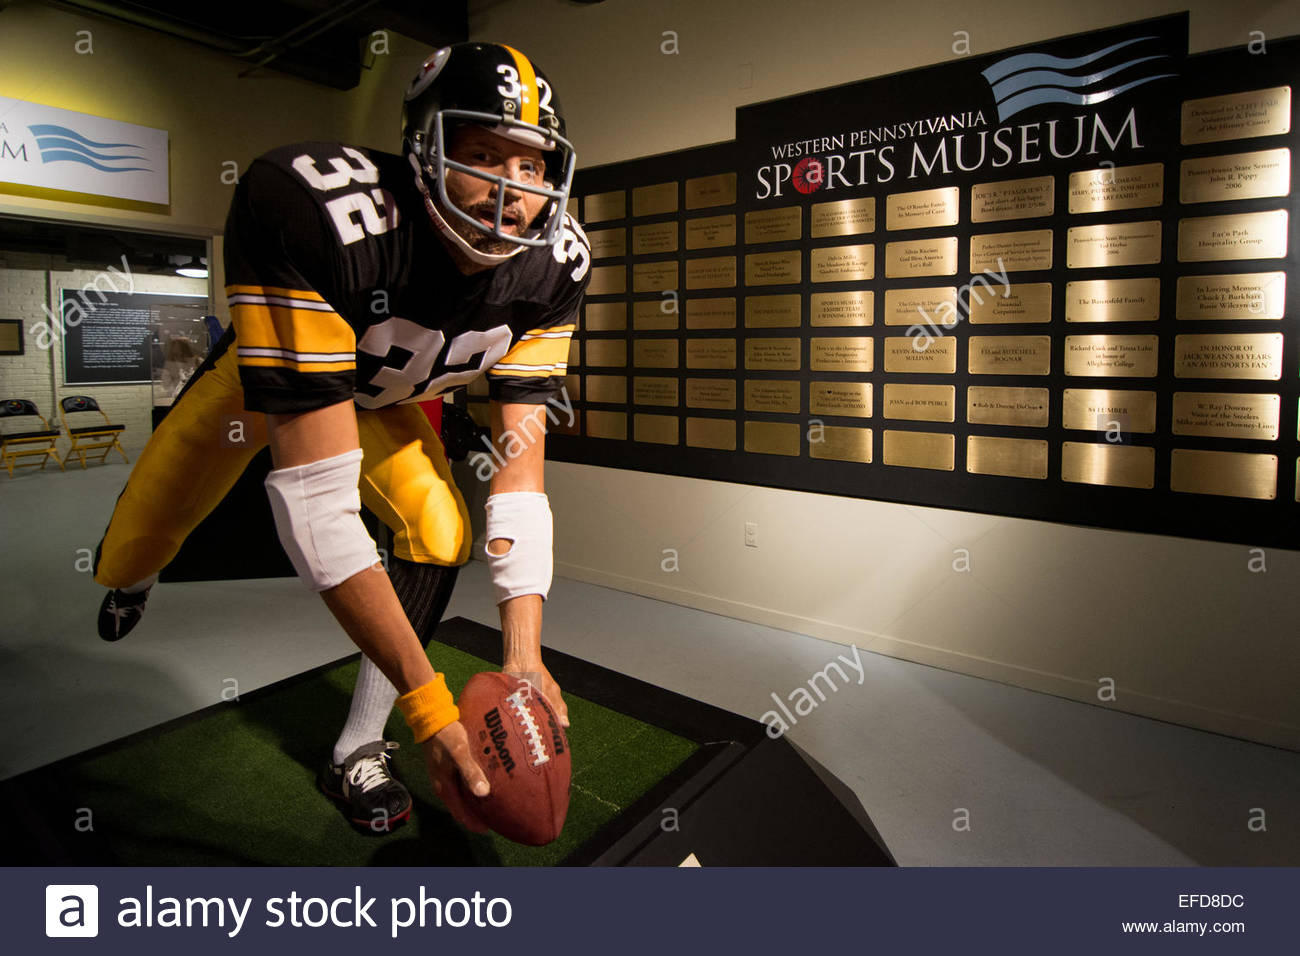 franco-harris-statue-at-the-western-pennsylvania-sports-museum-located-EFD8DC.jpg